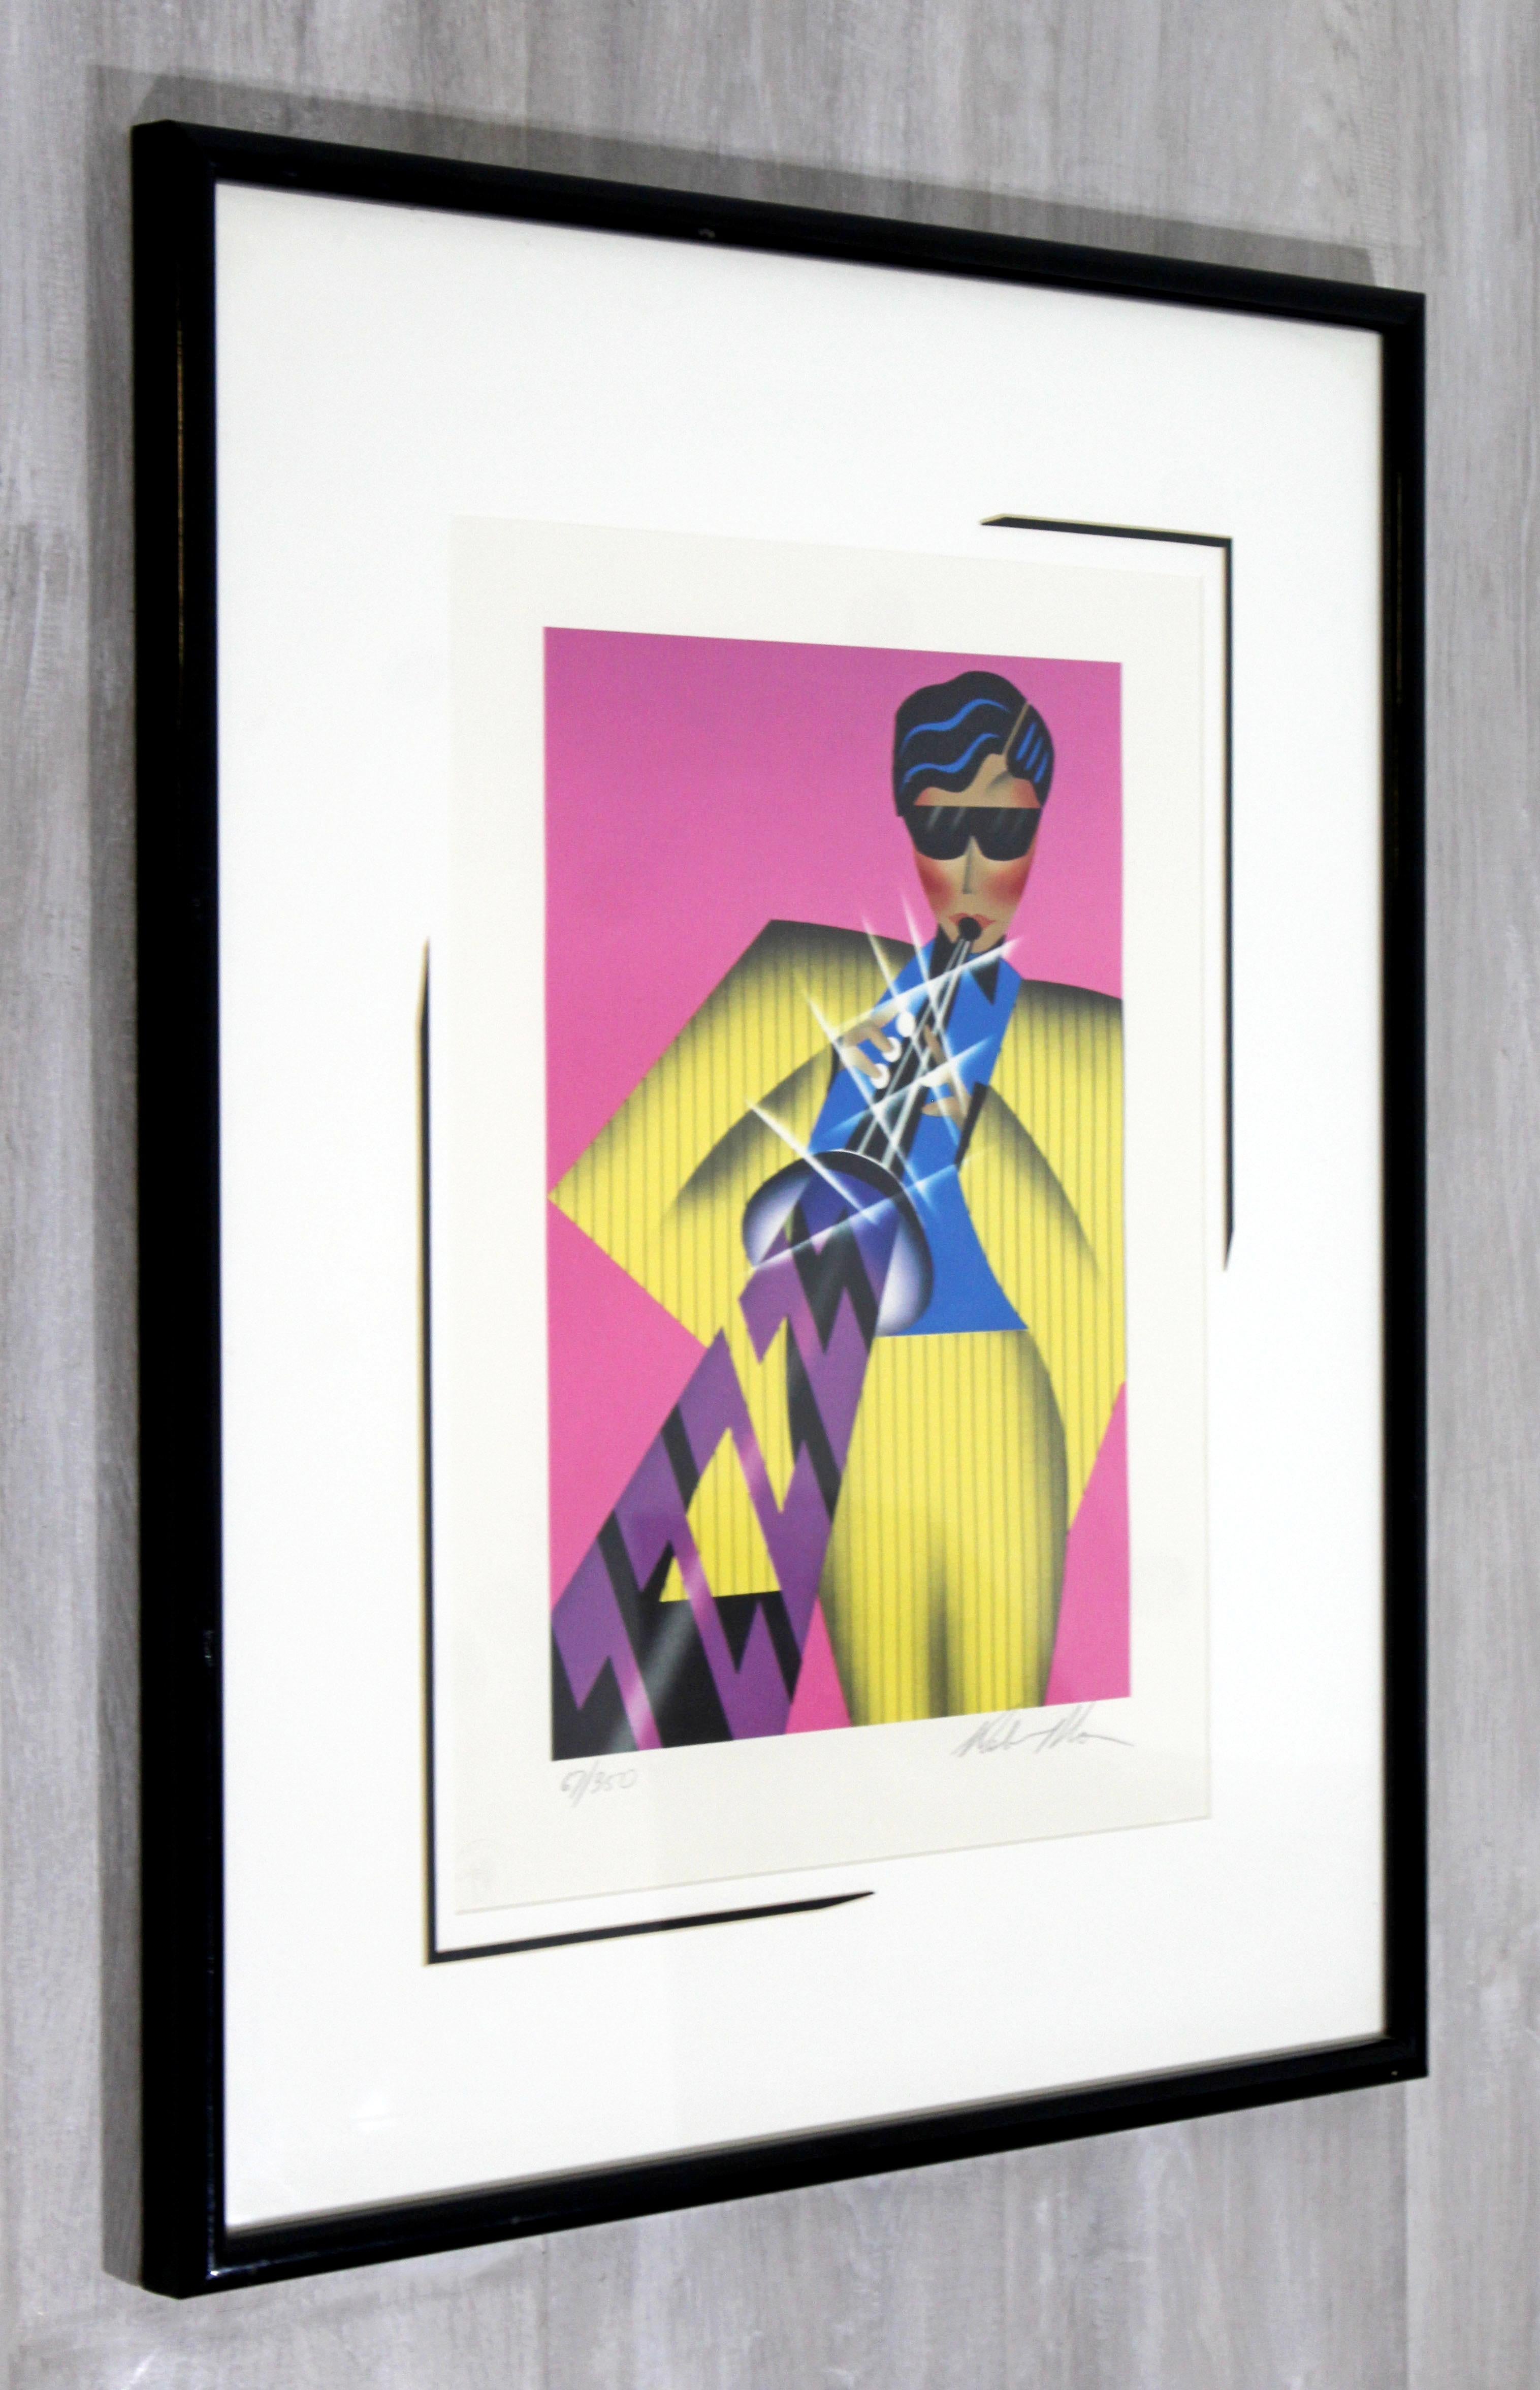 Contemporary Framed Lithograph of Jazz Player Signed Robin Morris 1980s 67/350 1